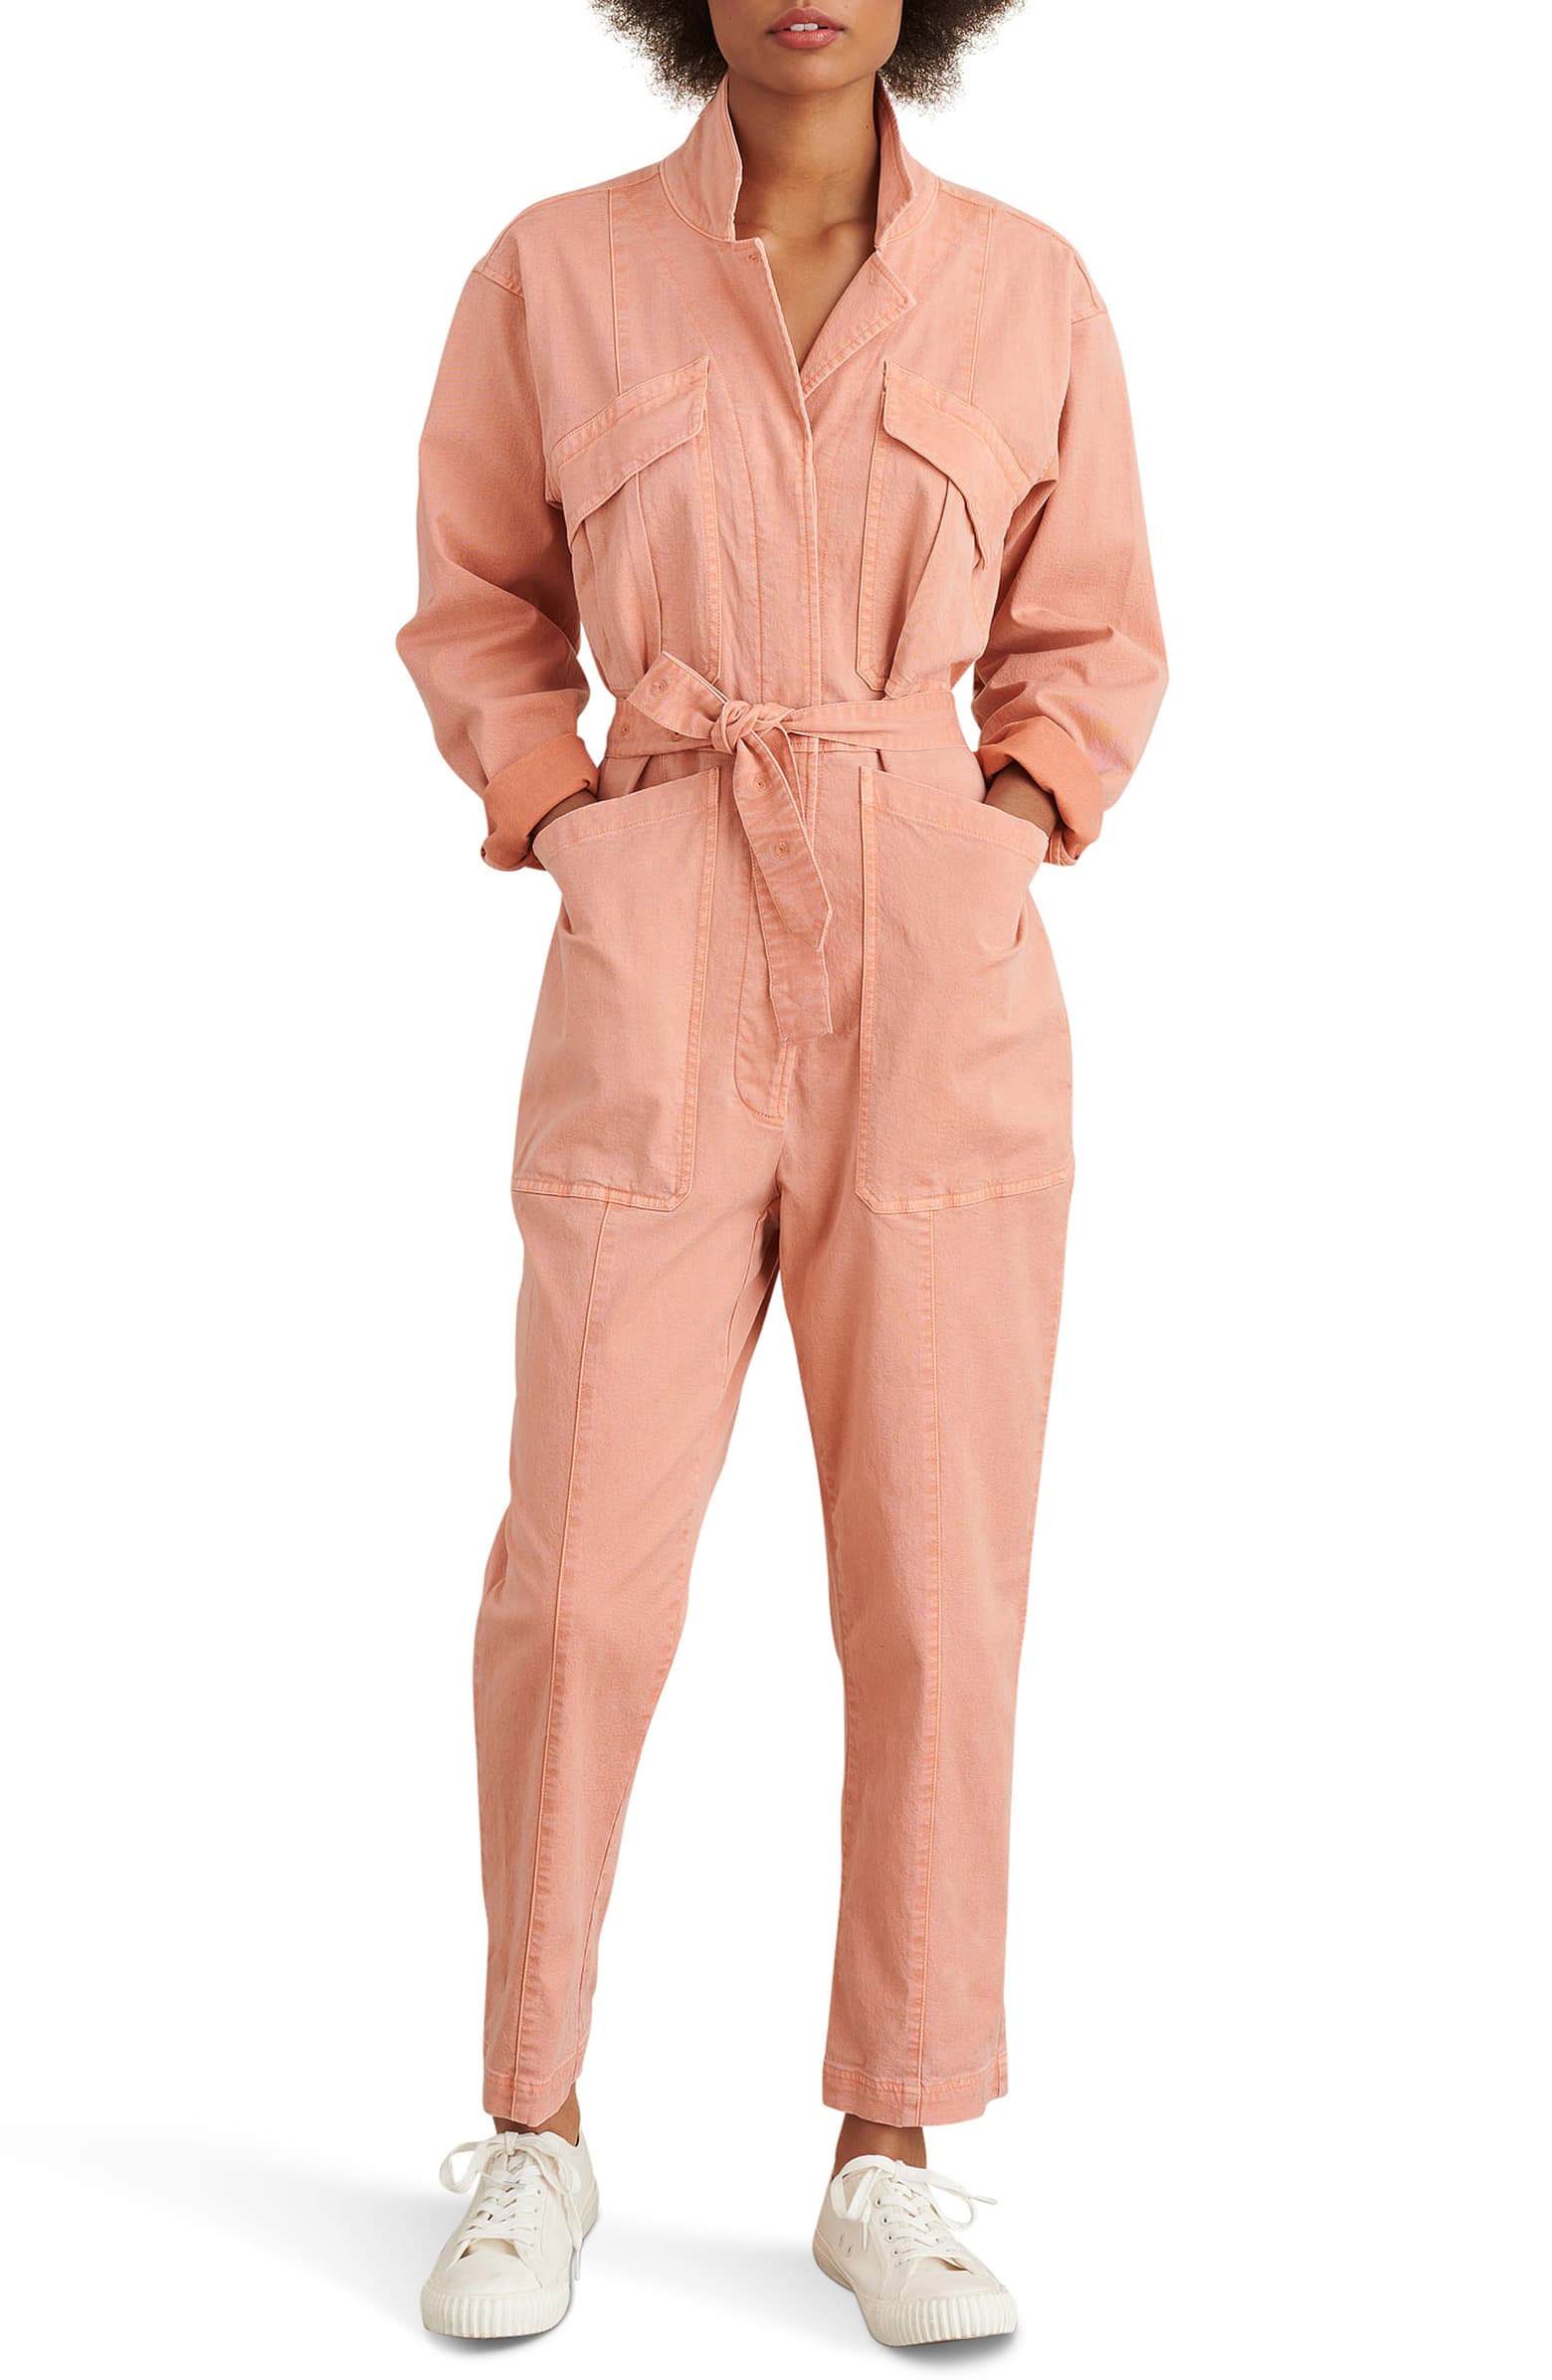 Take The Stress Out Of Your Morning With These Chic Jumpsuits